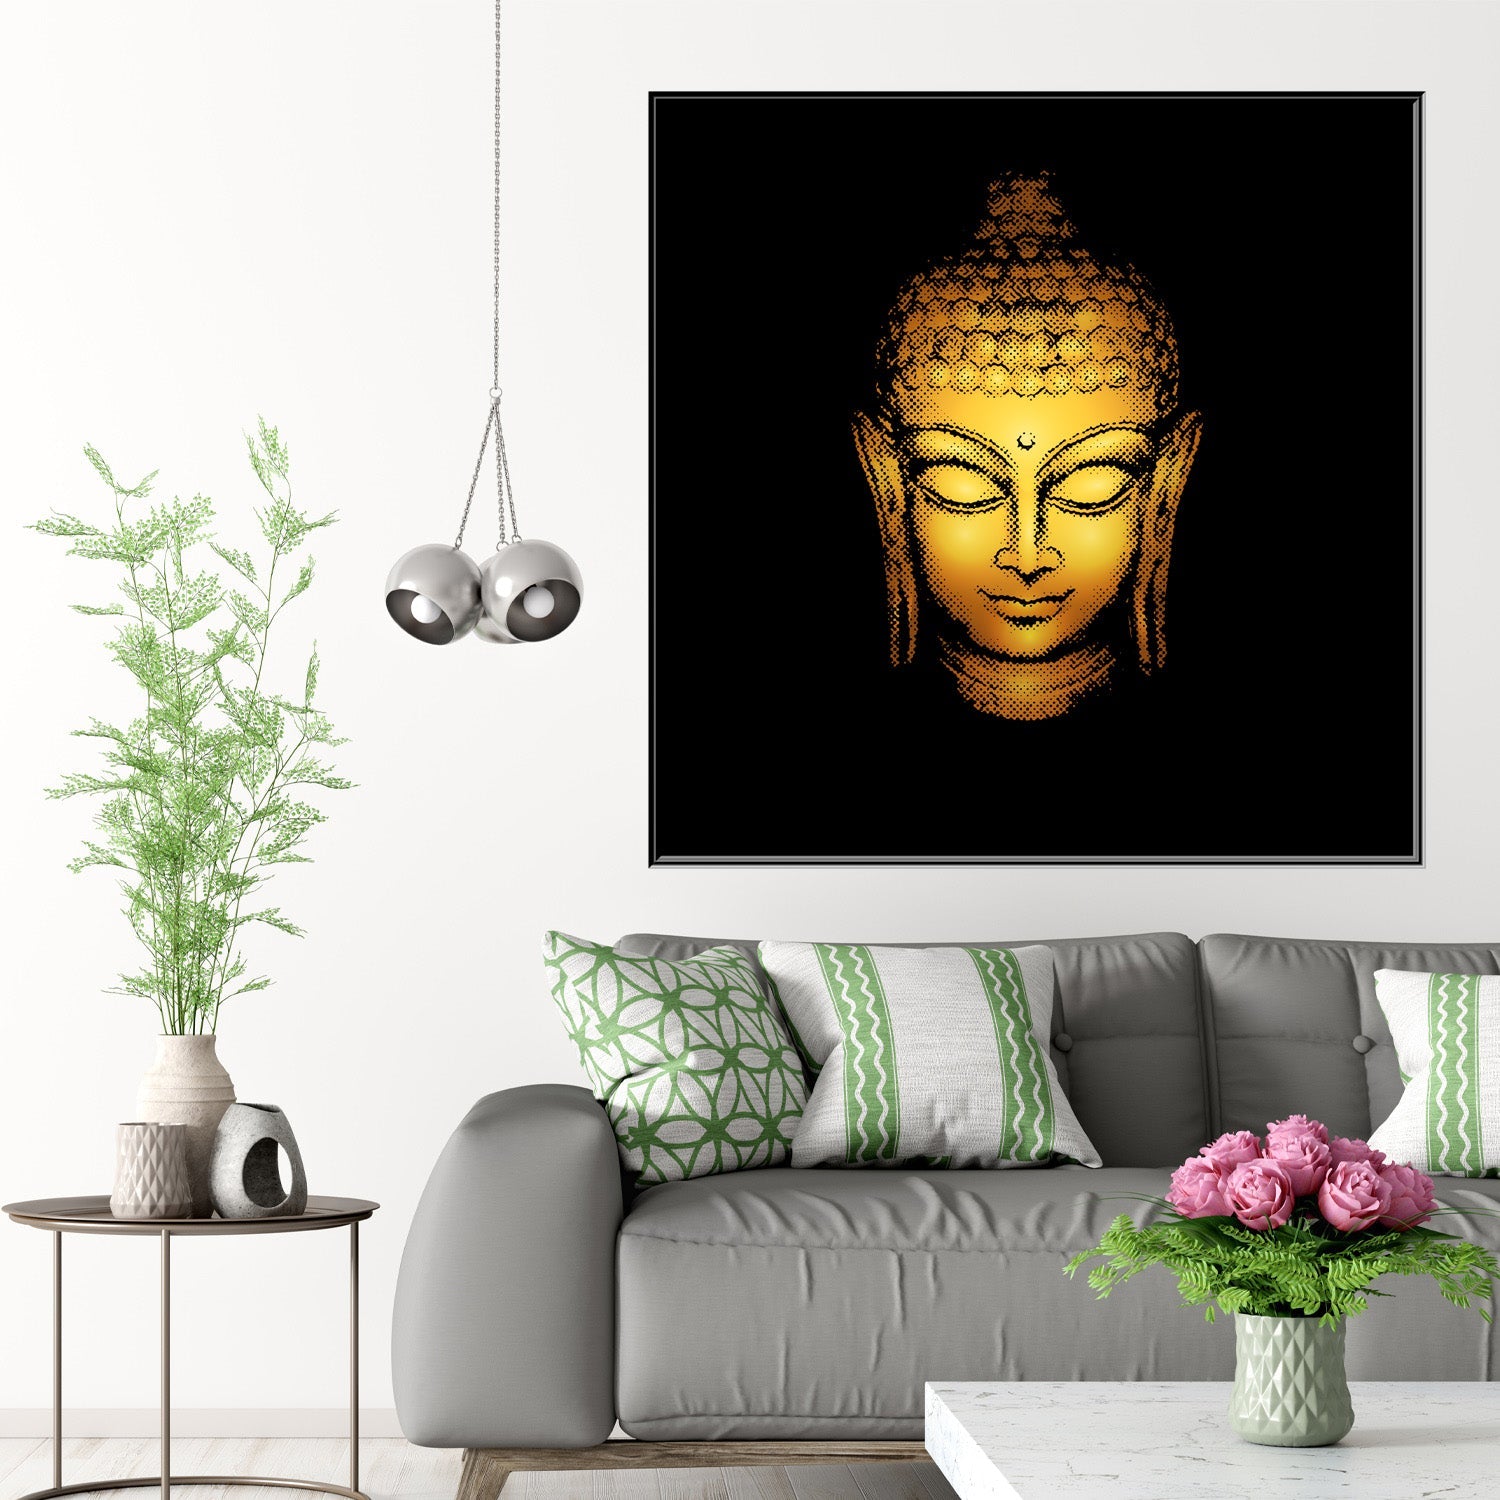 https://cdn.shopify.com/s/files/1/0387/9986/8044/products/BuddhaInGoldSketchCanvasPrintStretched-1.jpg